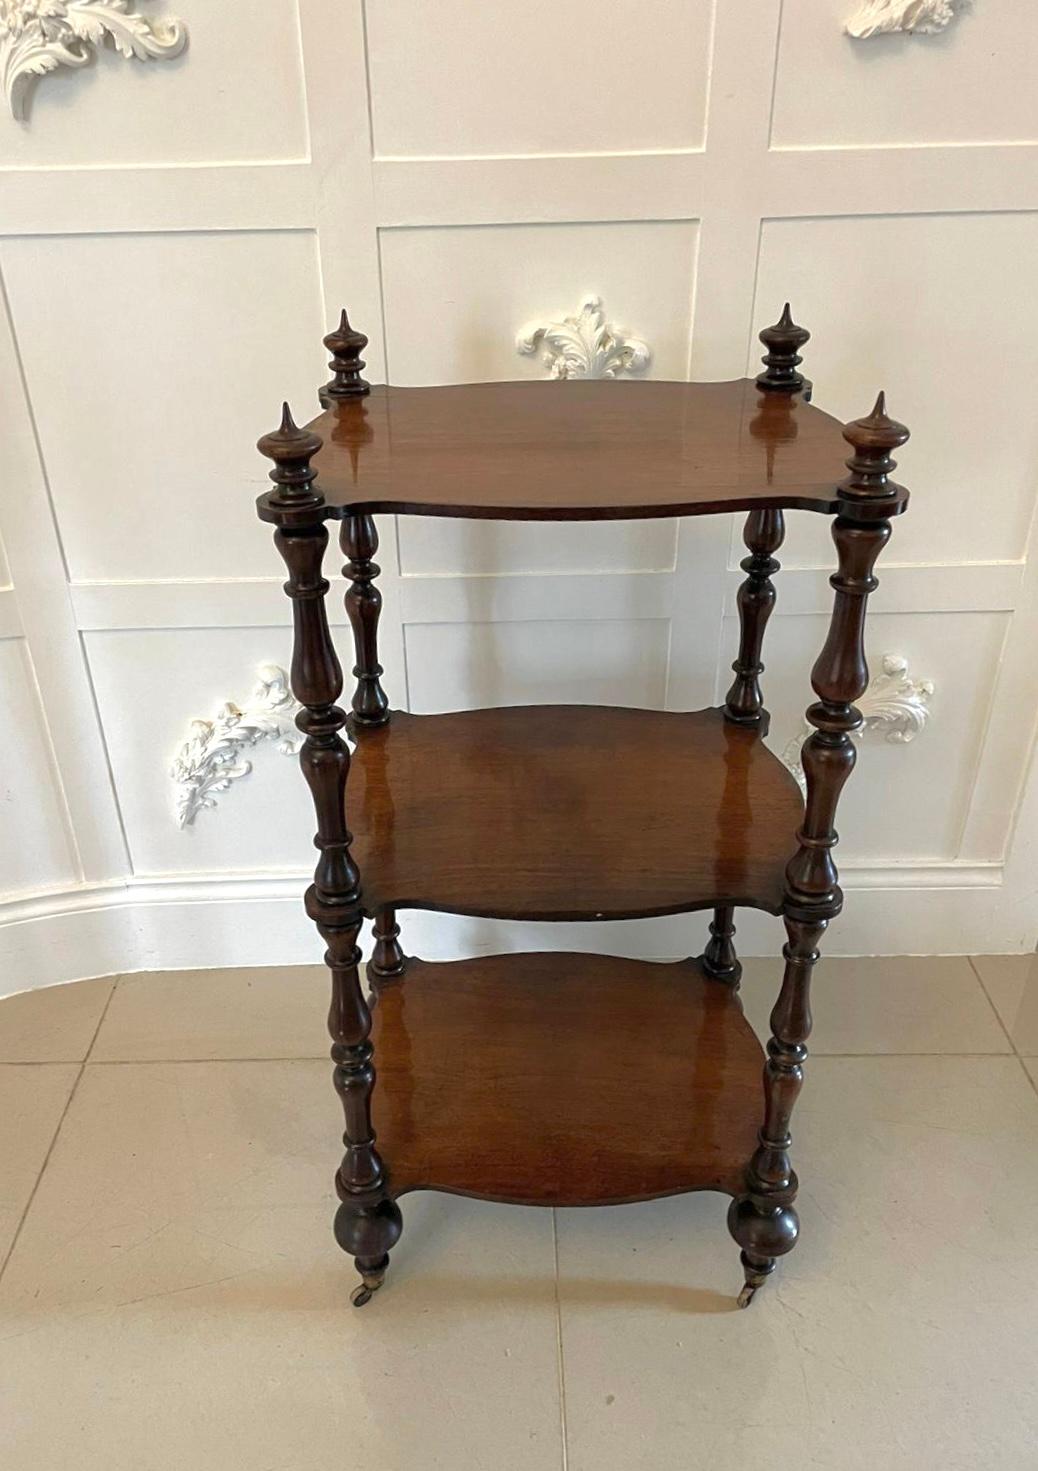 Antique Victorian freestanding rosewood whatnot having three serpentine shaped rosewood shelves supported by eight solid rosewood turned columns and four original turned finials. It stands on turned feet with original brass cup castors.

An